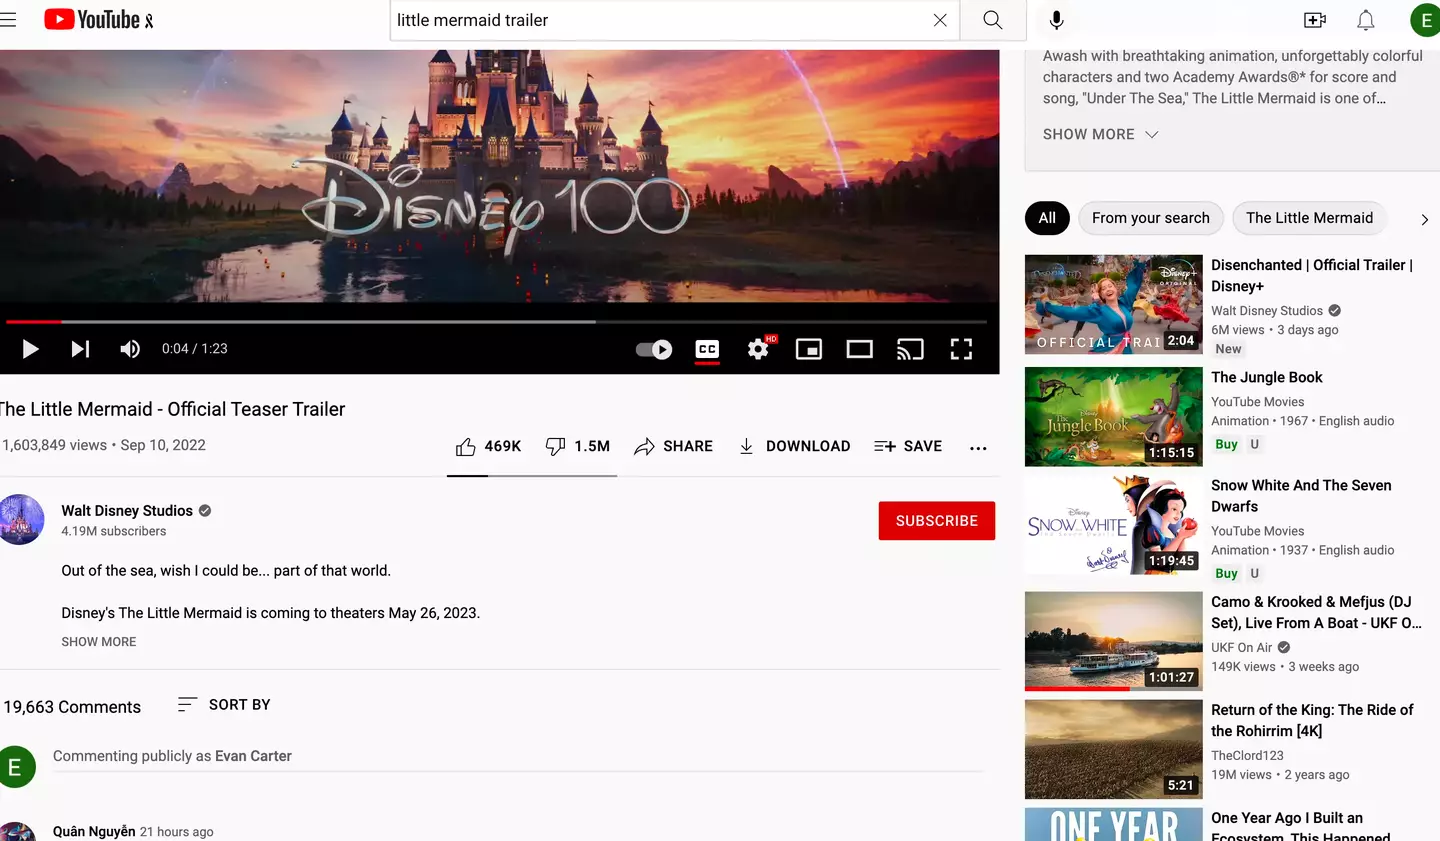 The Little Mermaid trailer on YouTube with dislikes.